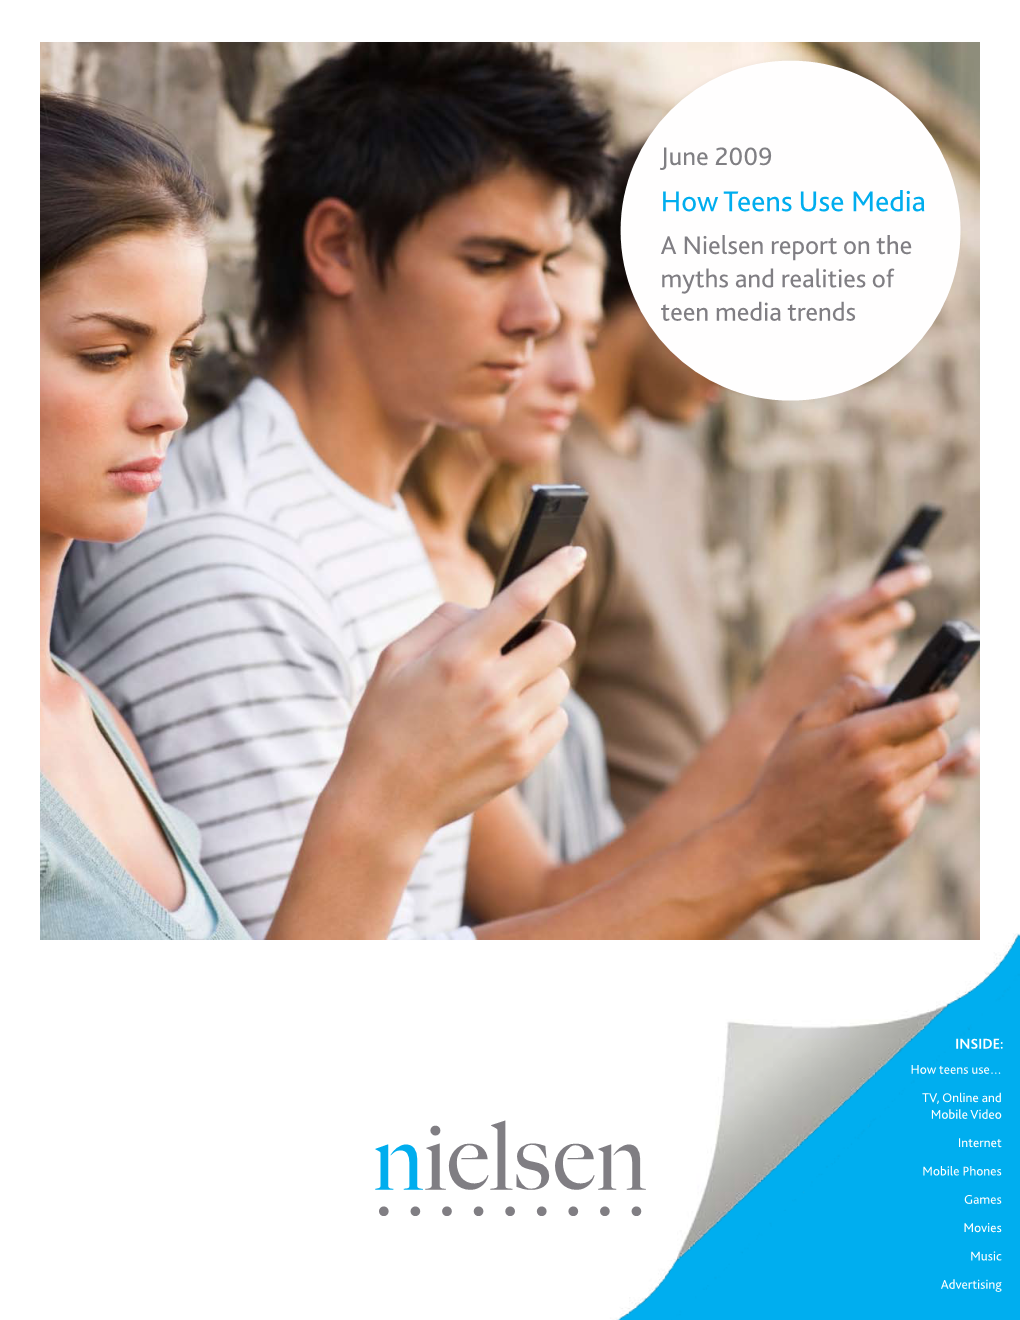 How Teens Use Media a Nielsen Report on the Myths and Realities of Teen Media Trends